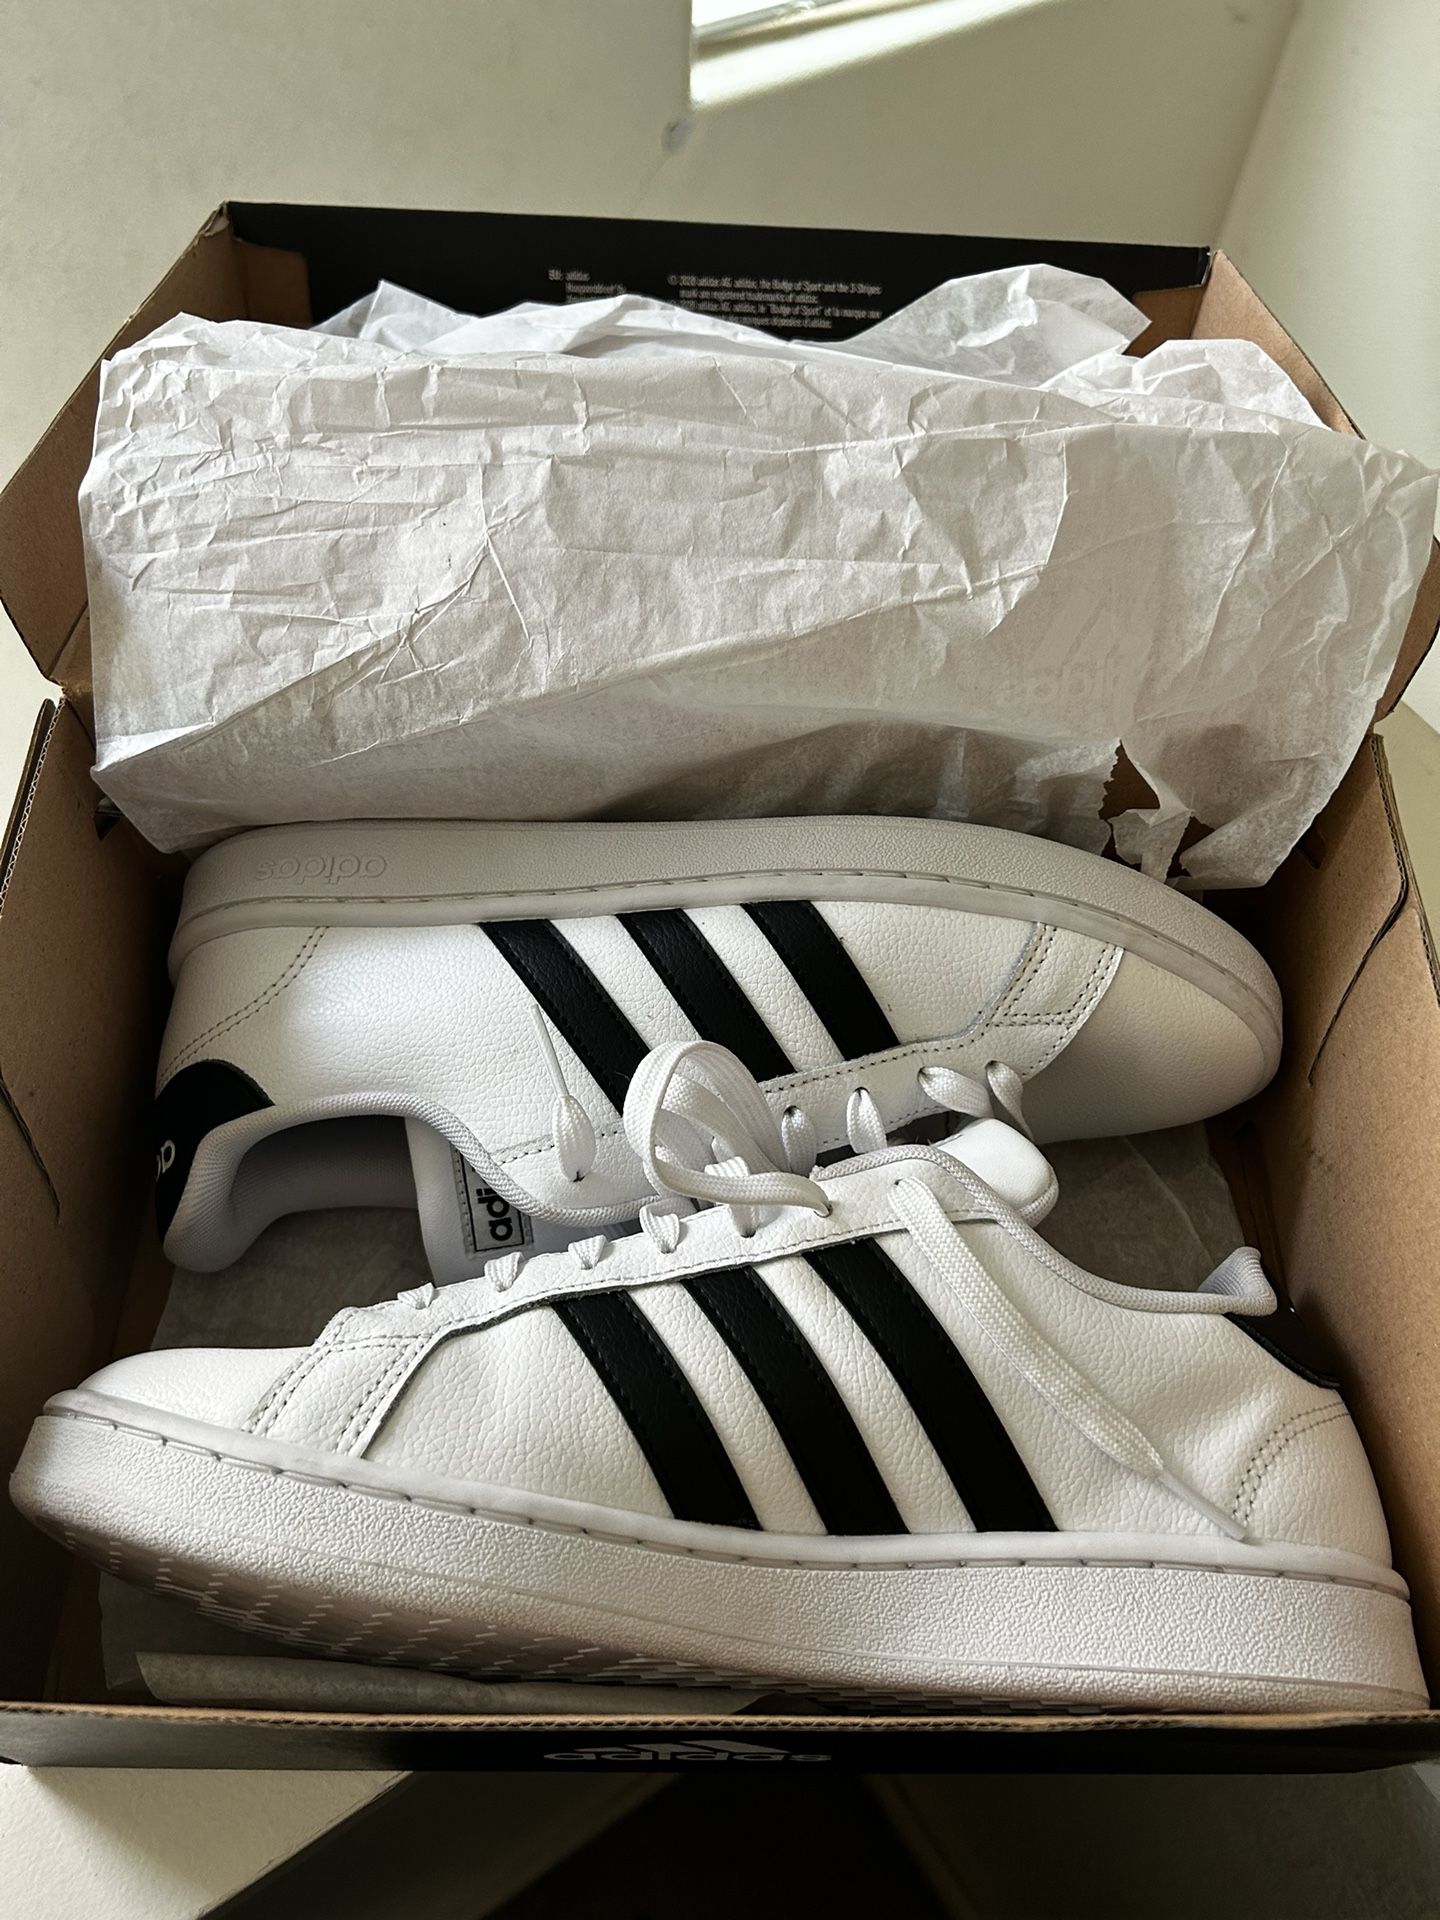 Men's Size 8.5 Court Adidas $35 Firm for Merced, CA - OfferUp